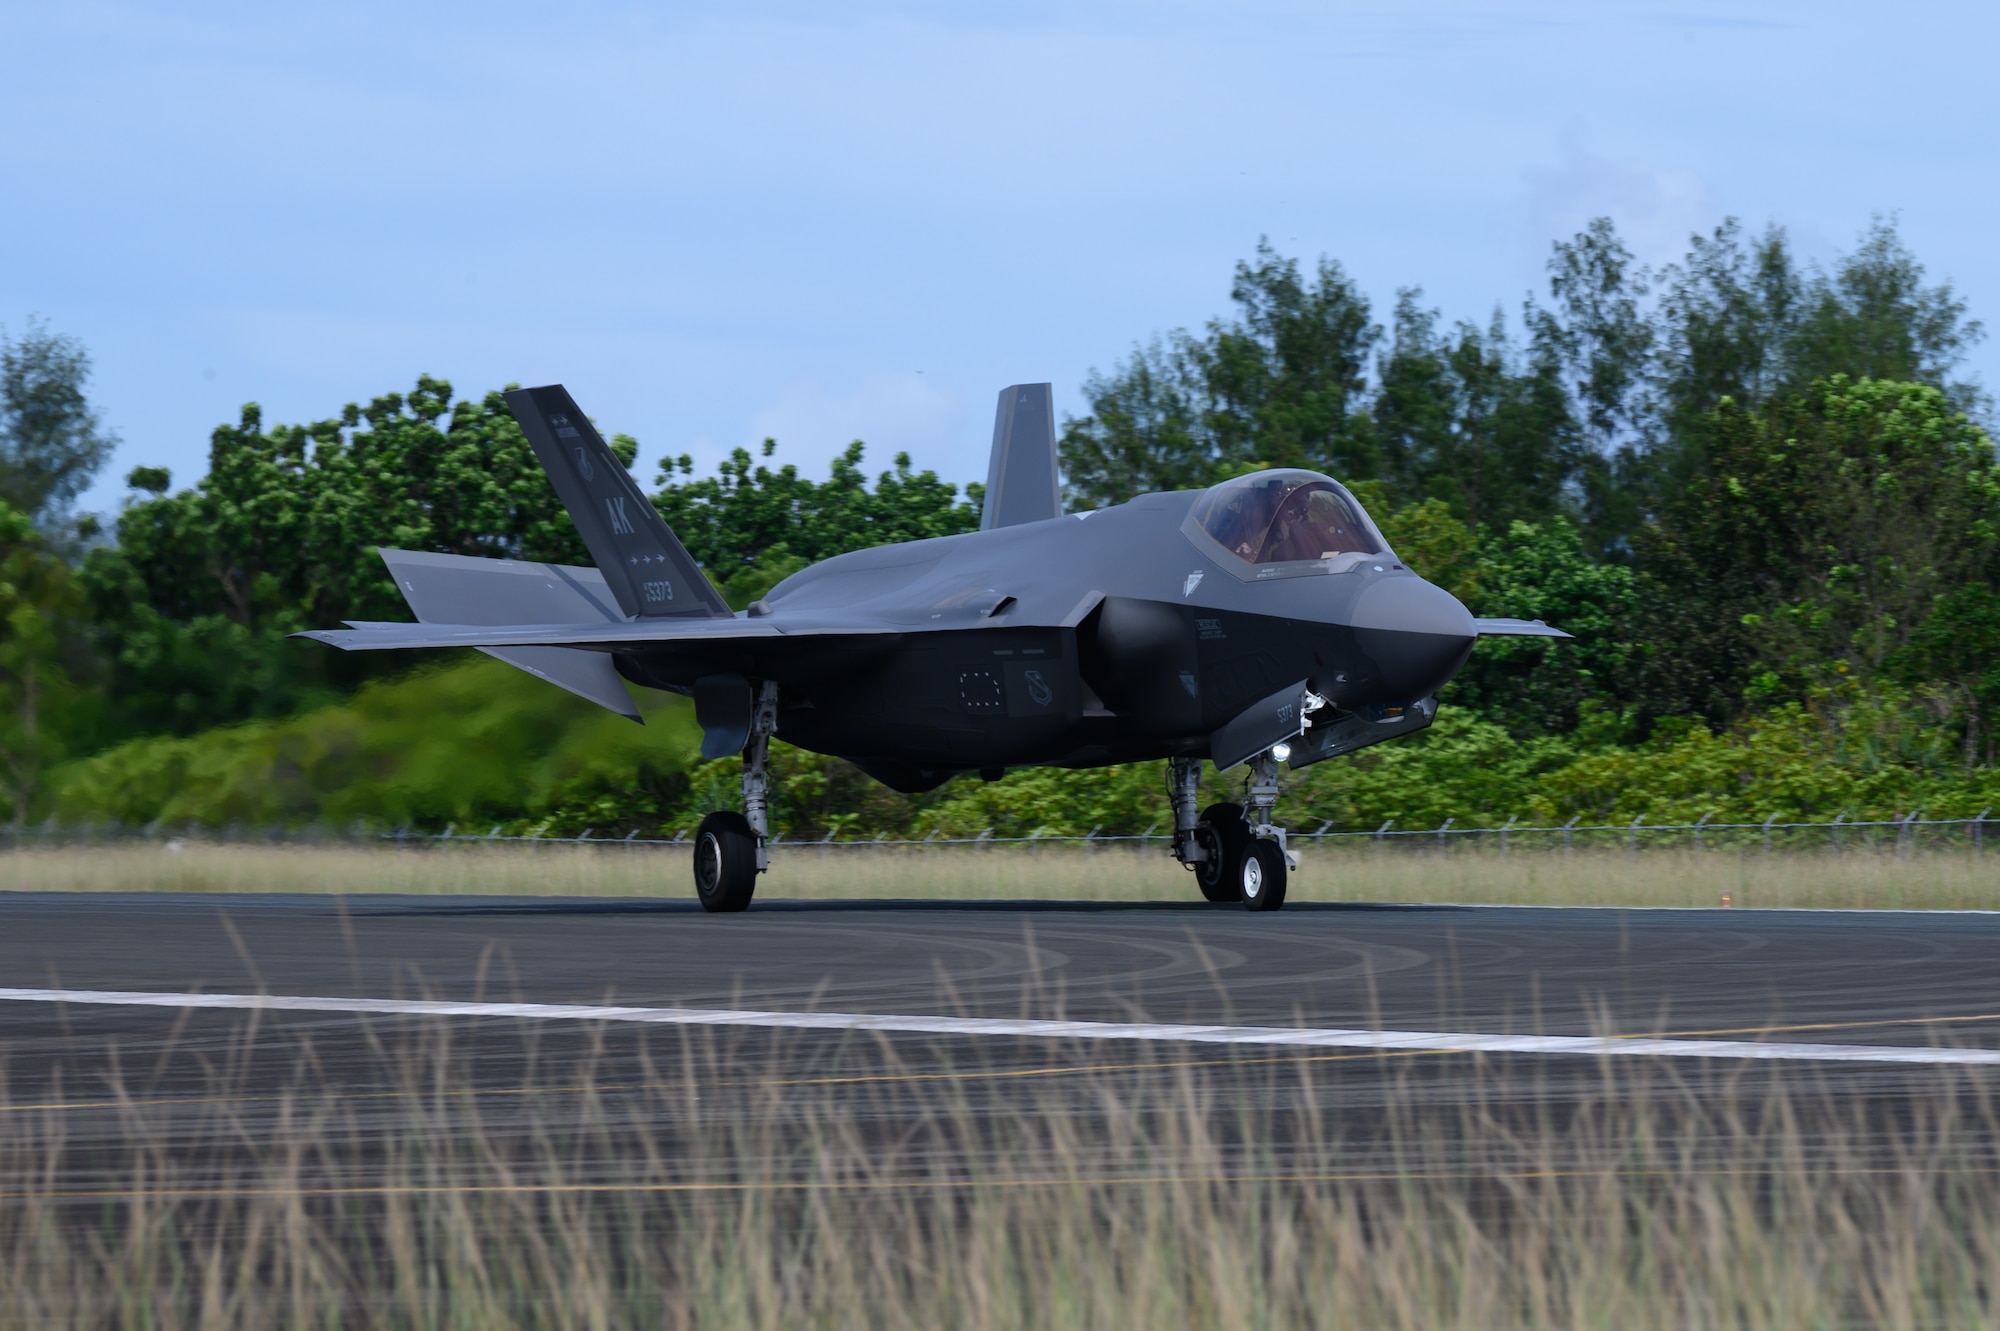 A U.S. Air Force F-35A Lightning II assigned to the 356th Expeditionary Fighter Squadron, 354th Air Expeditionary Wing, taxis on the runway upon initial arrival at Palau International Airport in support of Valiant Shield 22, June 11, 2022. VS22 is the ninth iteration of the series that began in 2006. It is a field training exercise that aims to prepare the Joint Force to rapidly respond to crises and contingencies across the spectrum of operations from humanitarian assistance and disaster relief to armed conflict. (U.S. Air Force photo by Senior Airman Jose Miguel T. Tamondong)